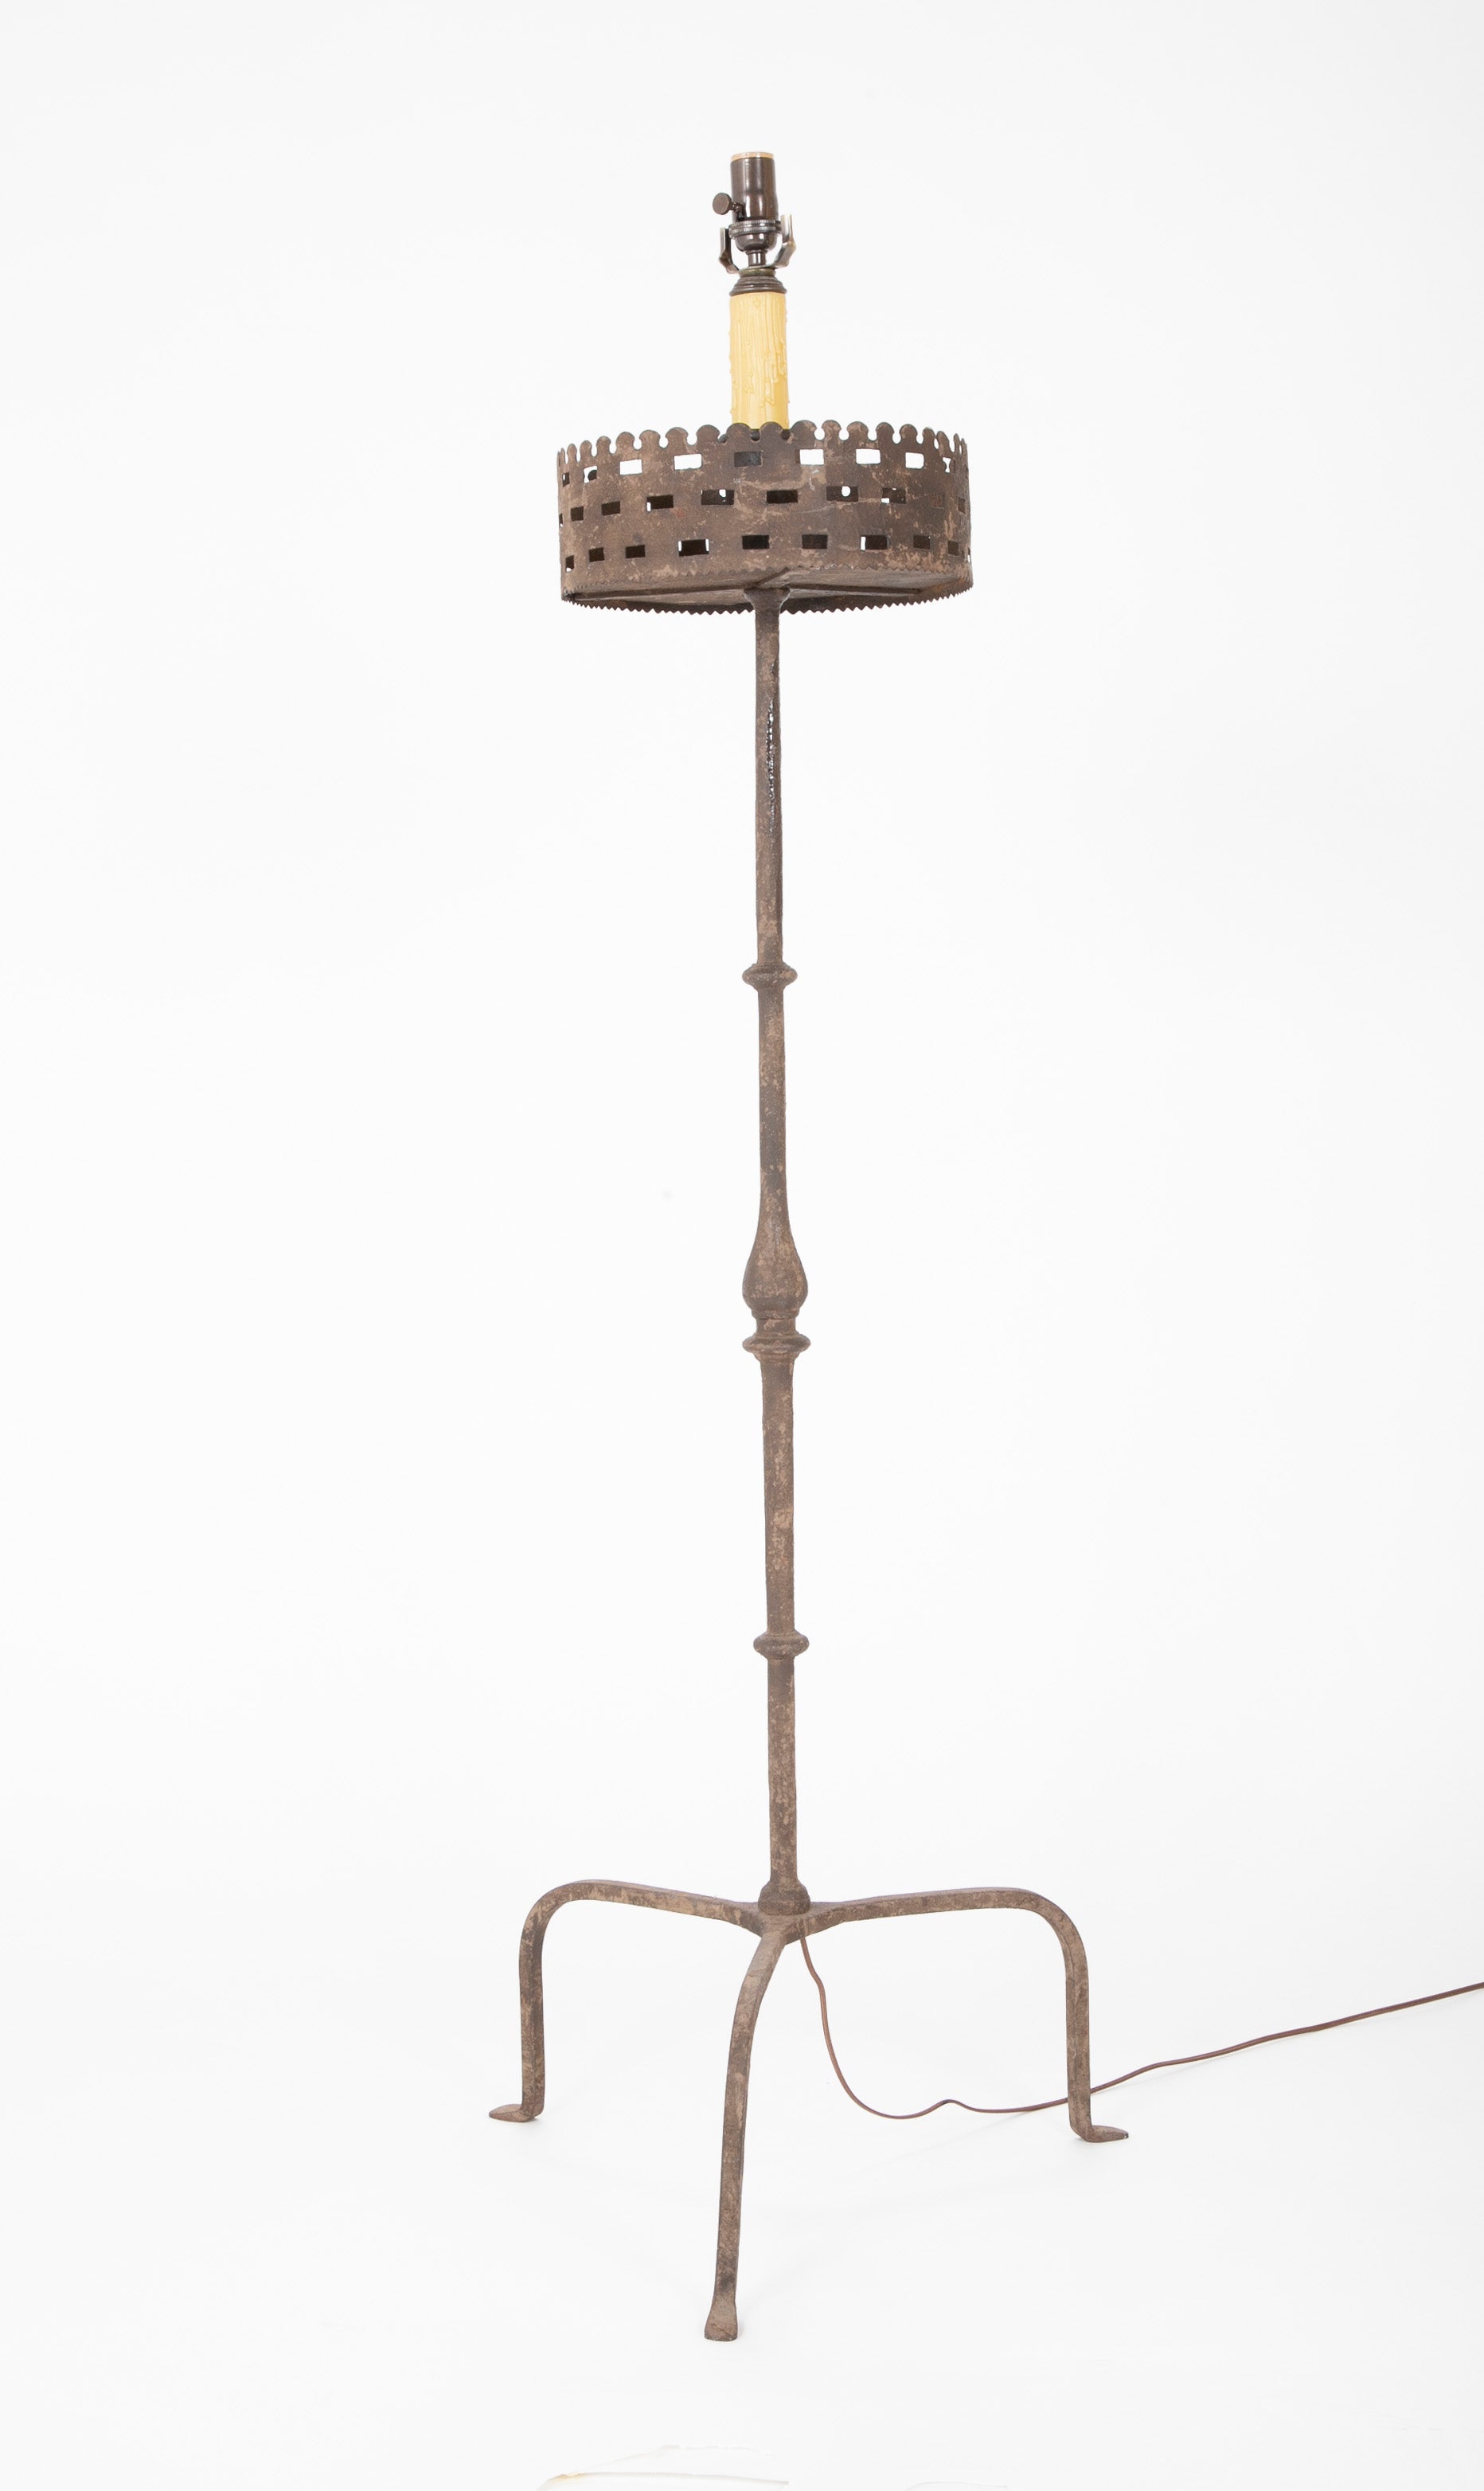 Handwrought Iron Pricket Stick now a Lamp with Crenulated Bobeche